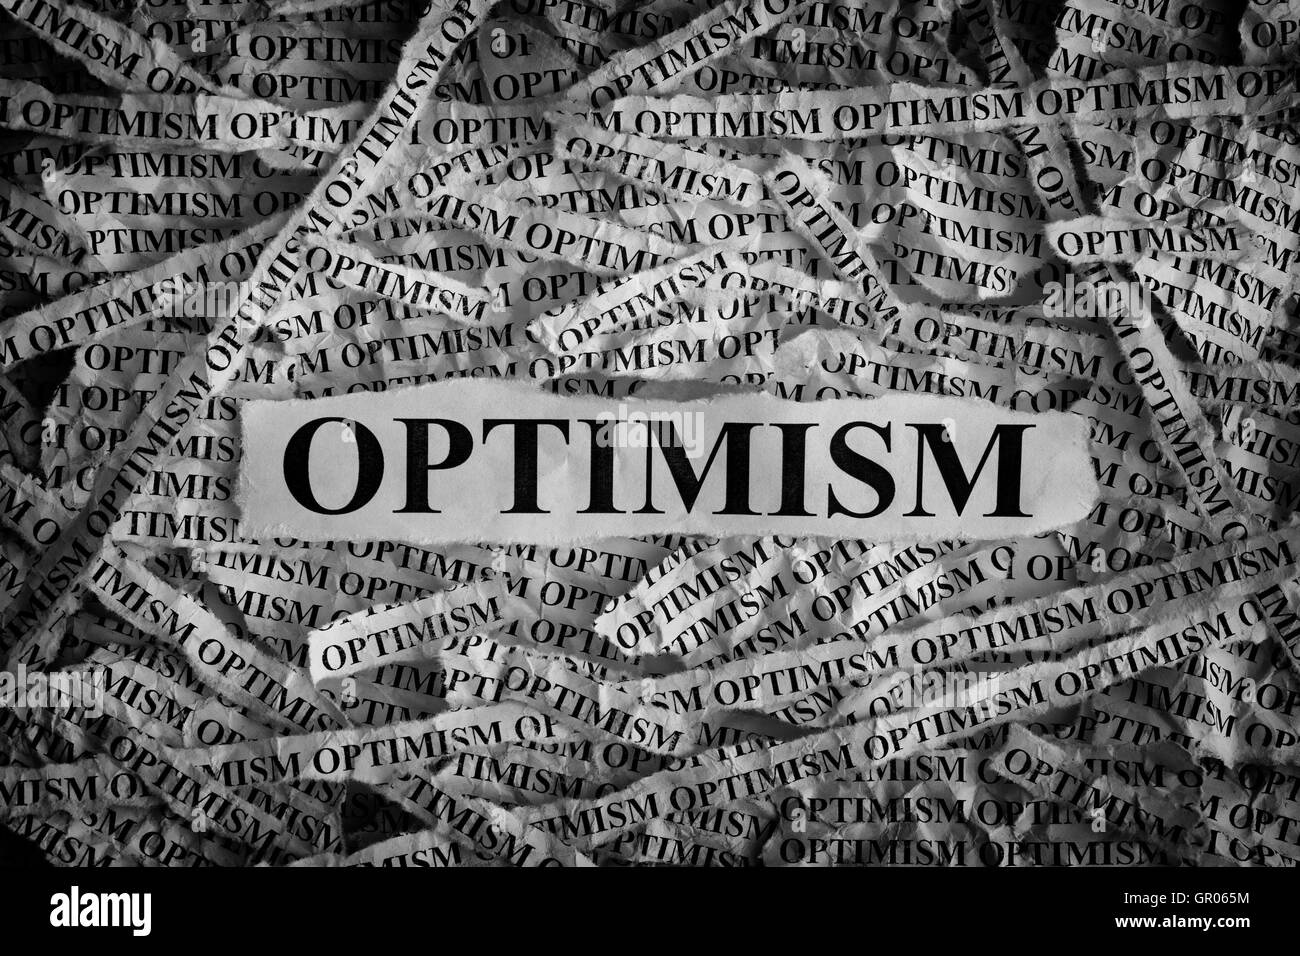 Optimism. Torn pieces of paper with the word Optimism. Concept Image. Black and White. Closeup. Stock Photo